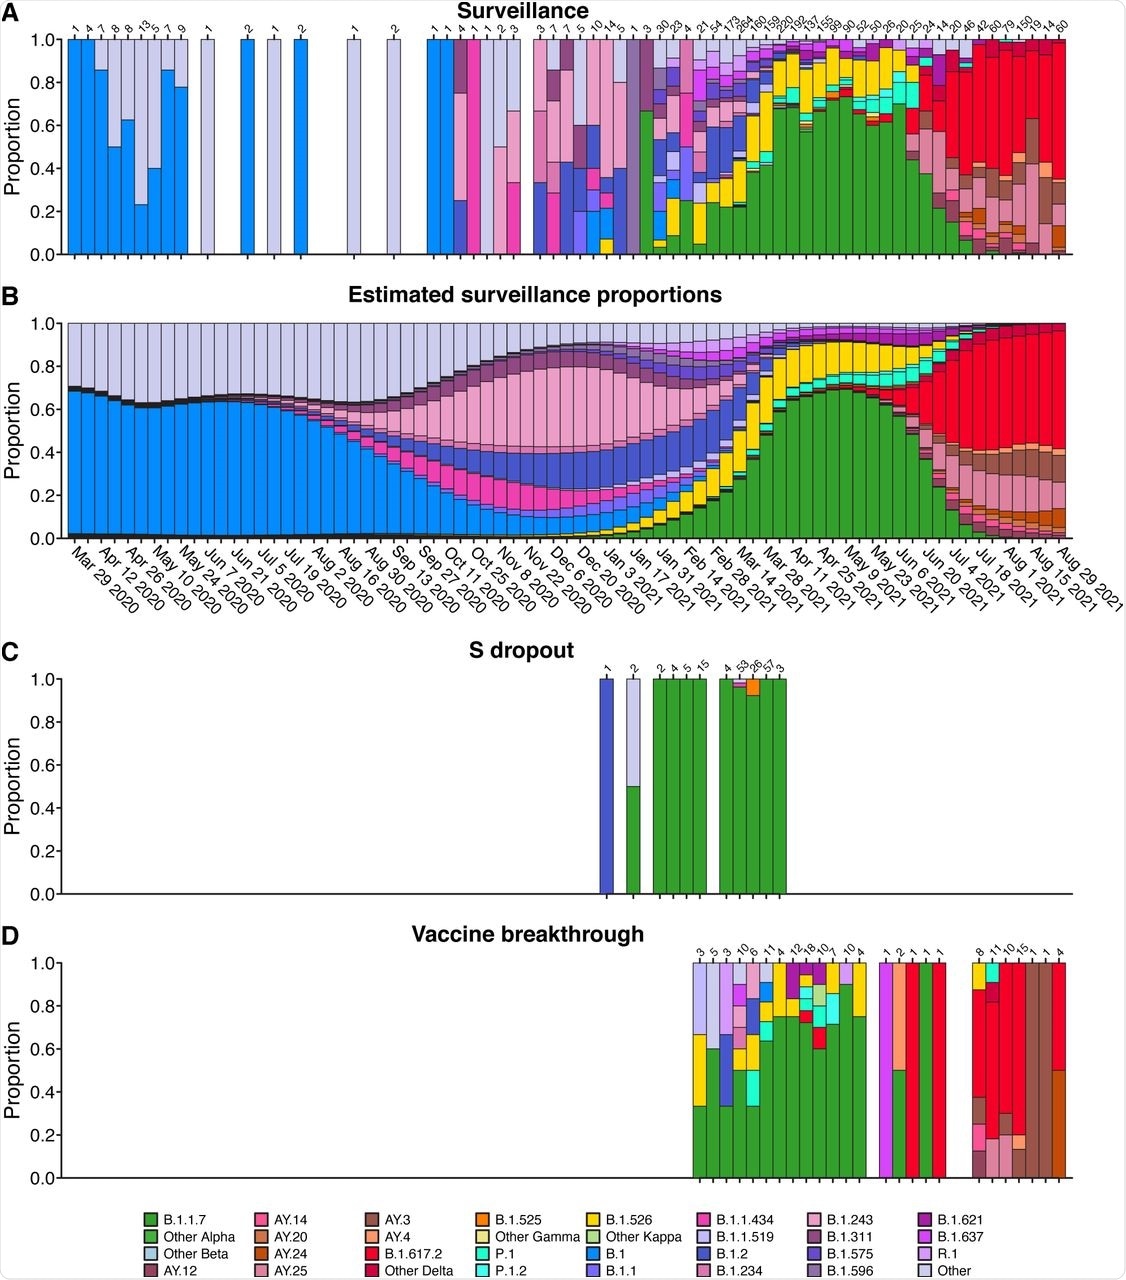 Comparison of viral genome sequence data from surveillance samples (A, B) to spike target gene failures (C) and vaccine breakthrough samples (D). A) Longitudinal stacked bar graph depicting the SARS-CoV-2 variants present in surveillance samples from the Delaware Valley, shown as the proportion of genomes classified as each variant lineage within each week. The numbers of genomes sampled each week are shown above the graph. Variants are colored according to the key at the bottom of the figure. B) Markings are the same as in A), but showing the proportions of variants estimated from the count data in A) using Bayesian autoregressive moving average multinomial logistic regression. C) Markings as in A), but showing counts of spike target gene failures samples. D) Markings as in A), but showing the counts of vaccine breakthrough samples.